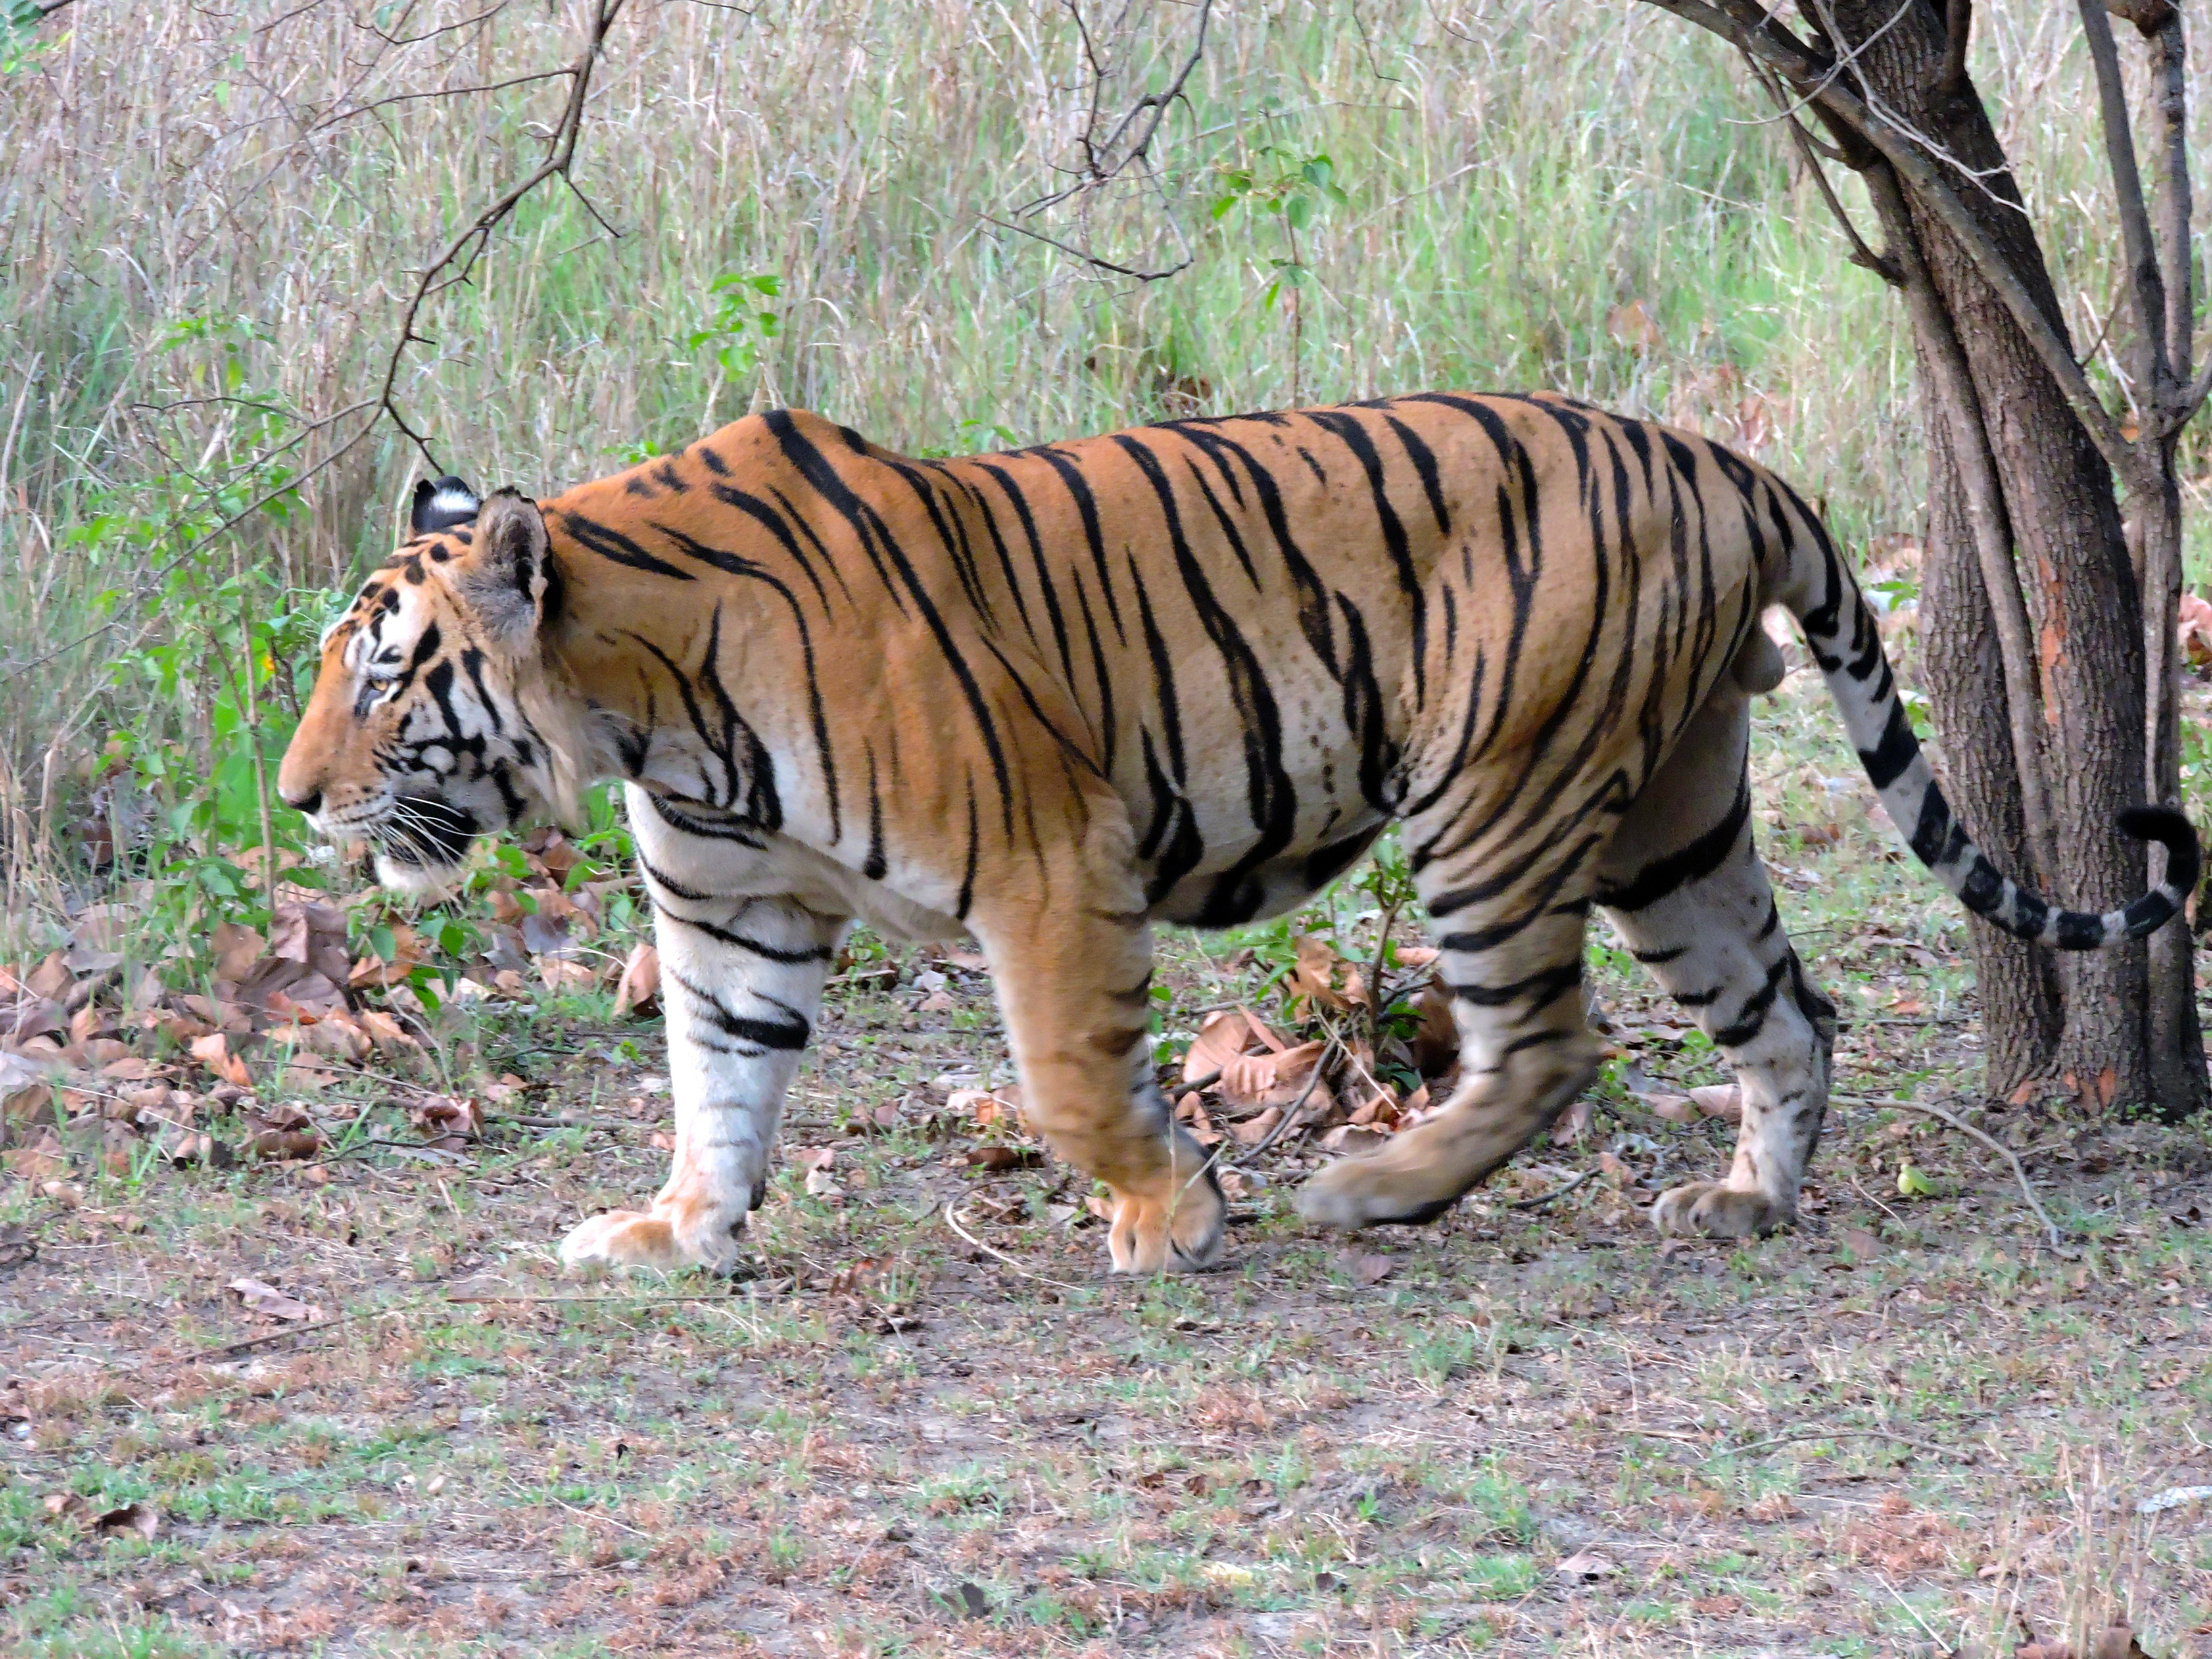 What is the scientific name for a Bengal tiger?